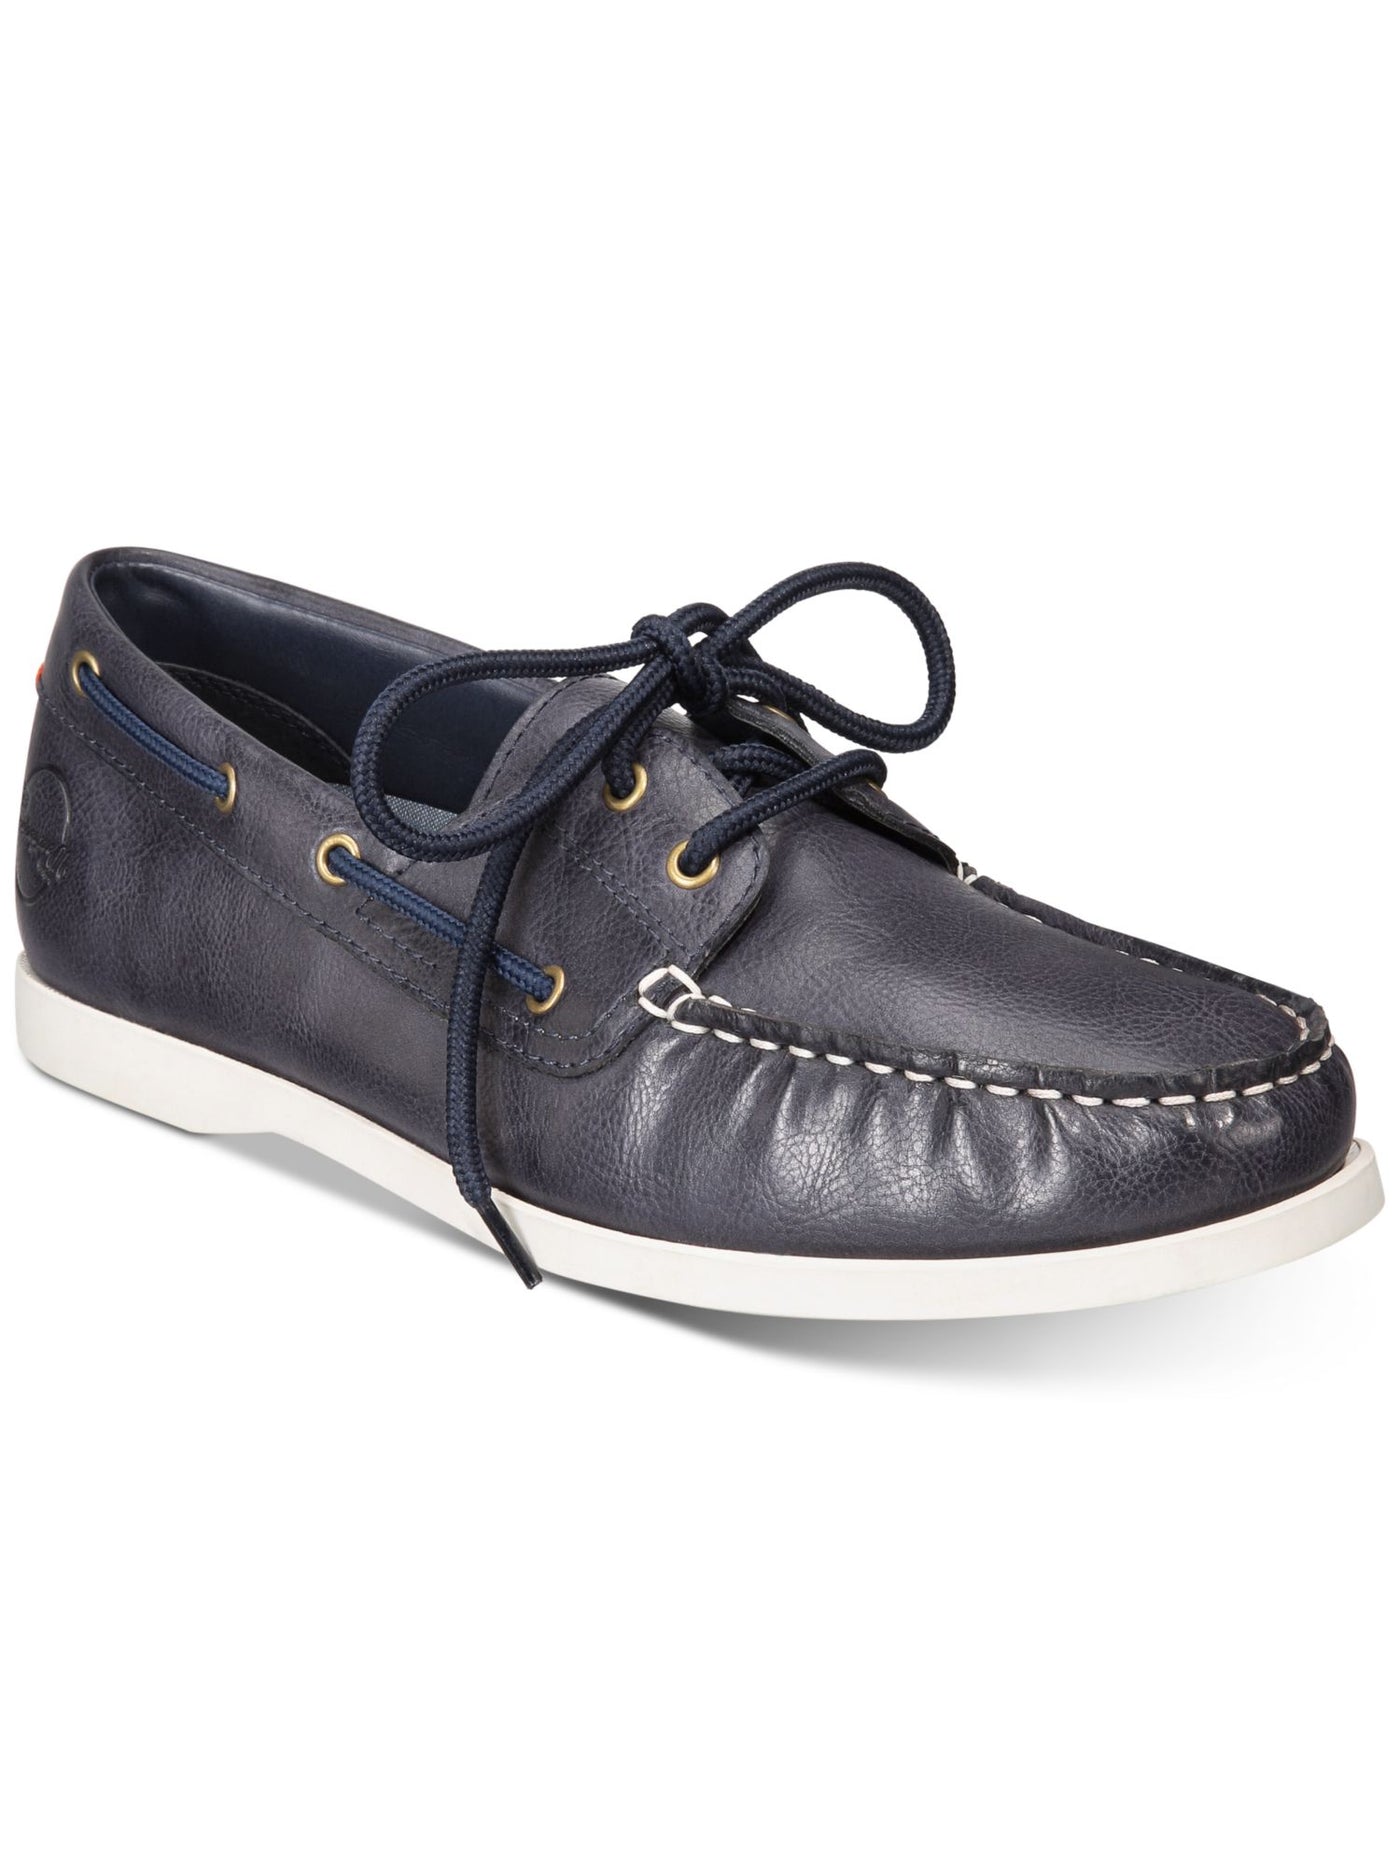 WEATHERPROOF VINTAGE Mens Navy Cushioned Benny Round Toe Lace-Up Boat Shoes 8 M